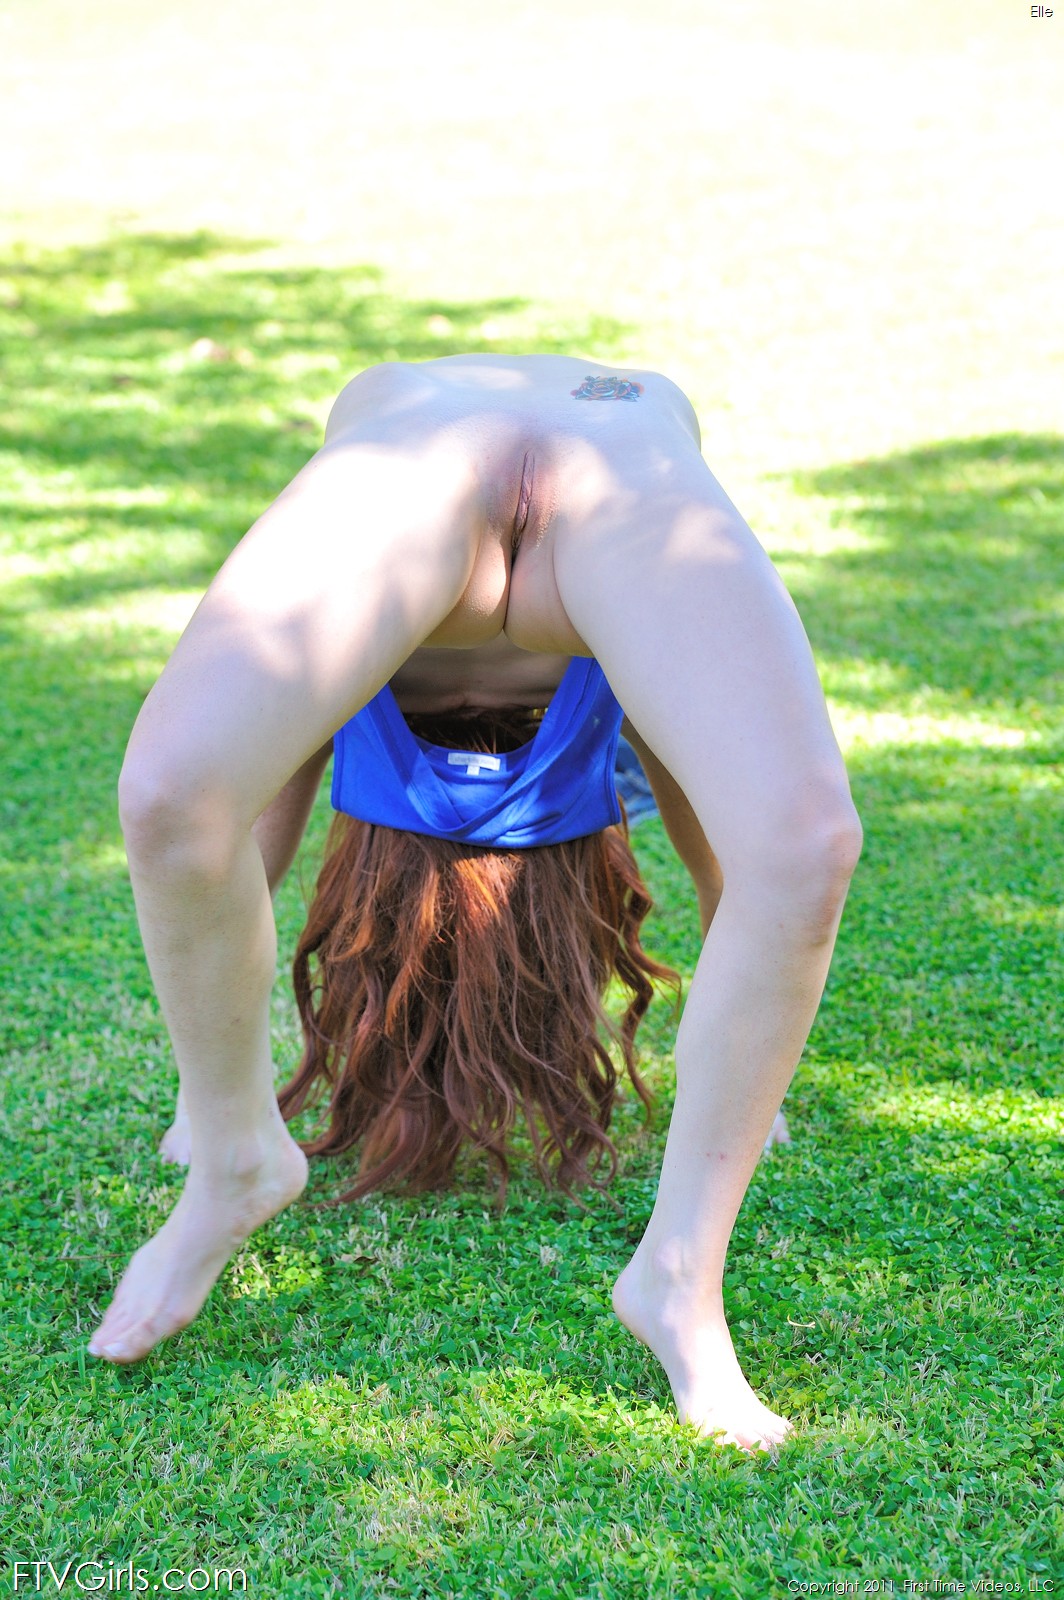 Elle Alexandra in Redheads have more fun - Flexible One photo 77 of 82